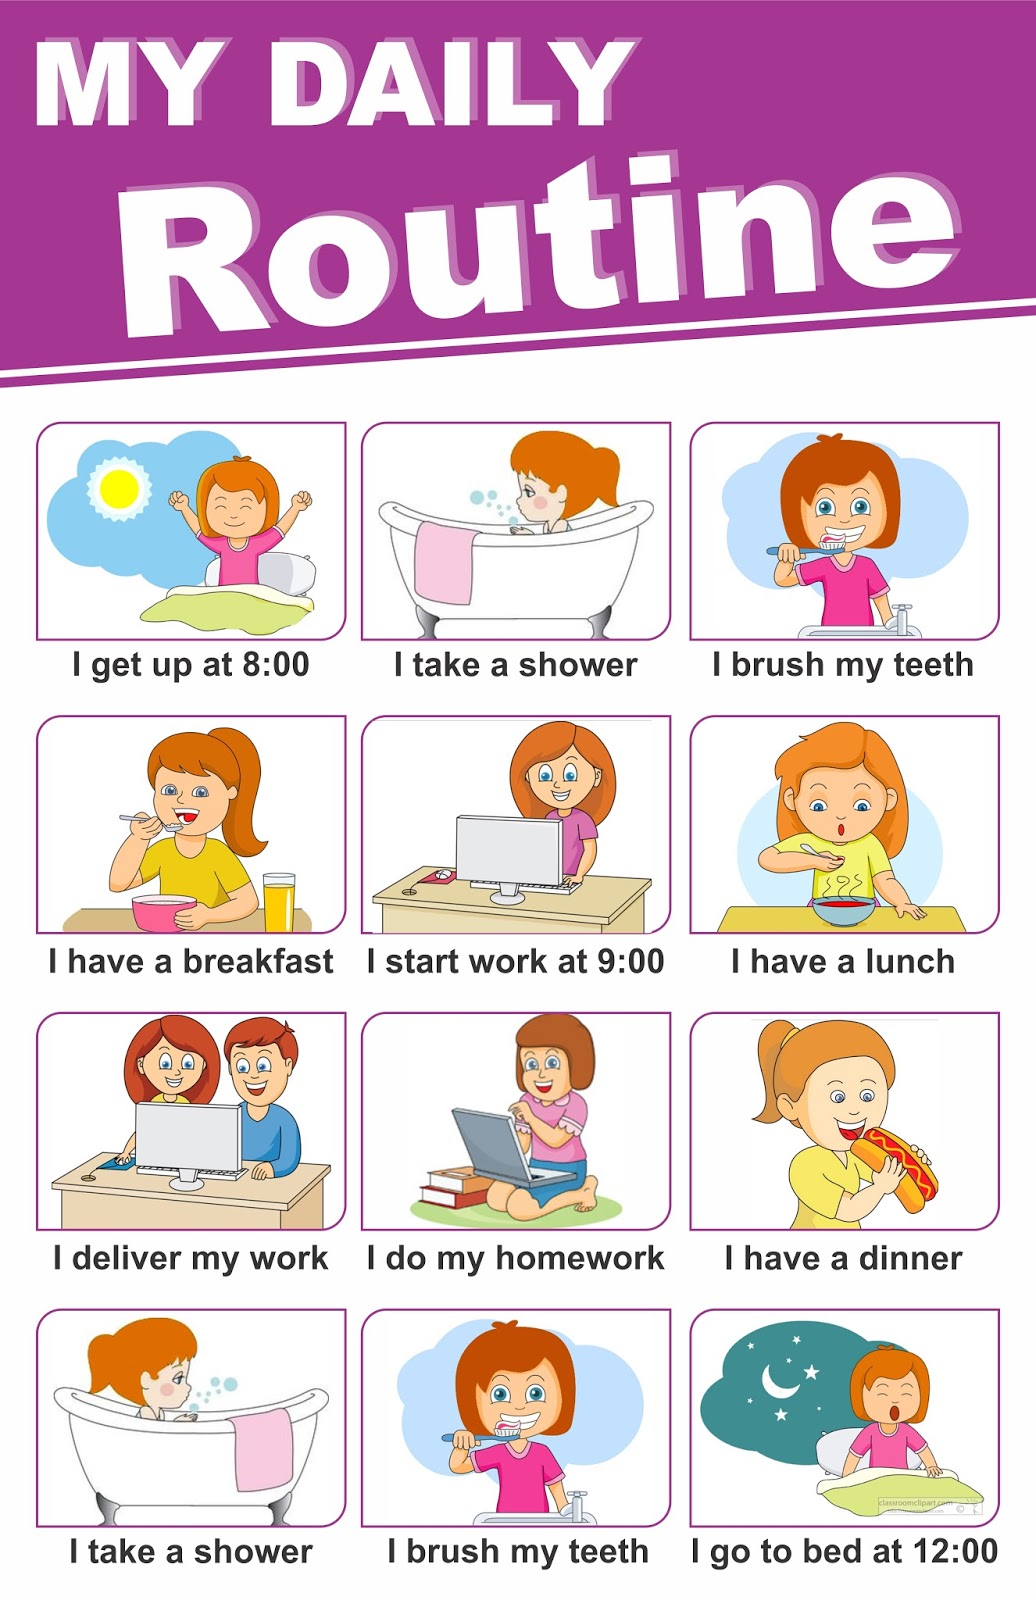 Daily routines wordwall. Английский Daily Routine. My Daily Routine. Карточки Daily activities. Проект my Daily Routine.